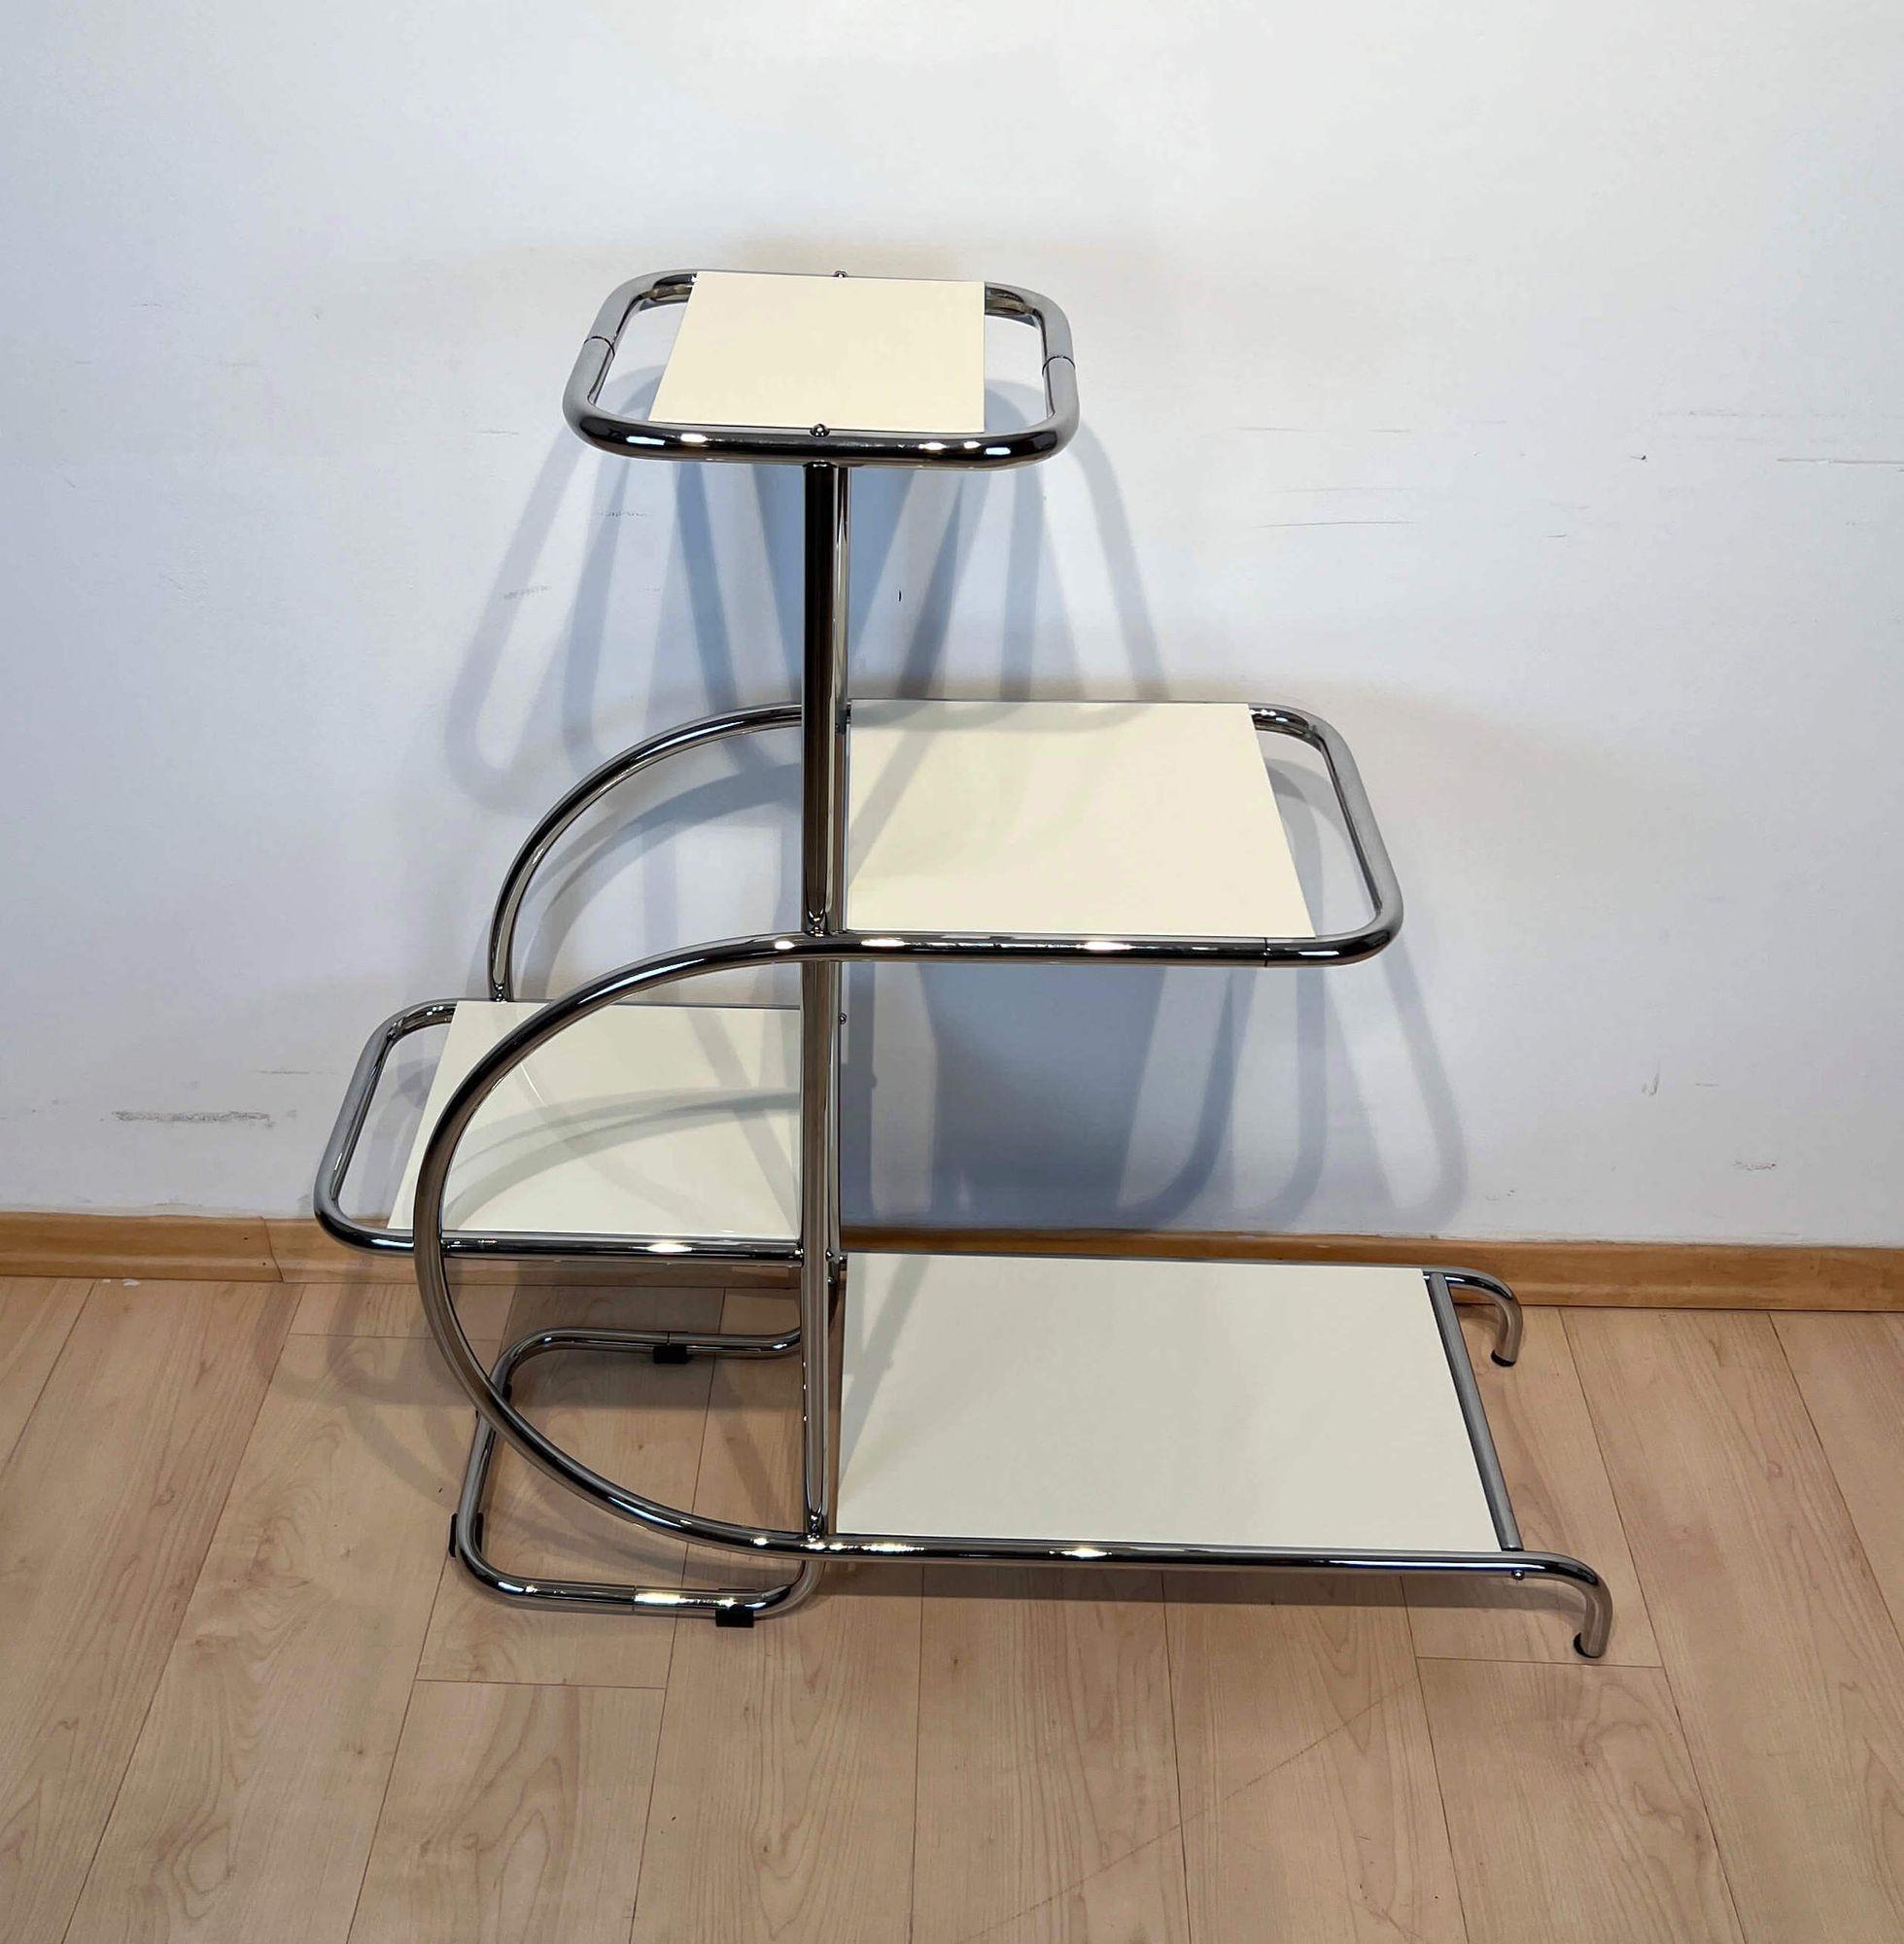 Bauhaus steeltube Etagere / shelf from Germany about 1930.
 
Original furniture from the 1930s, completely restored.
Newly galvanized / nickel-plated steeltubes and screws and new creme-white lacquer on wooden shelves. 
 
Design: Emile Guyot,